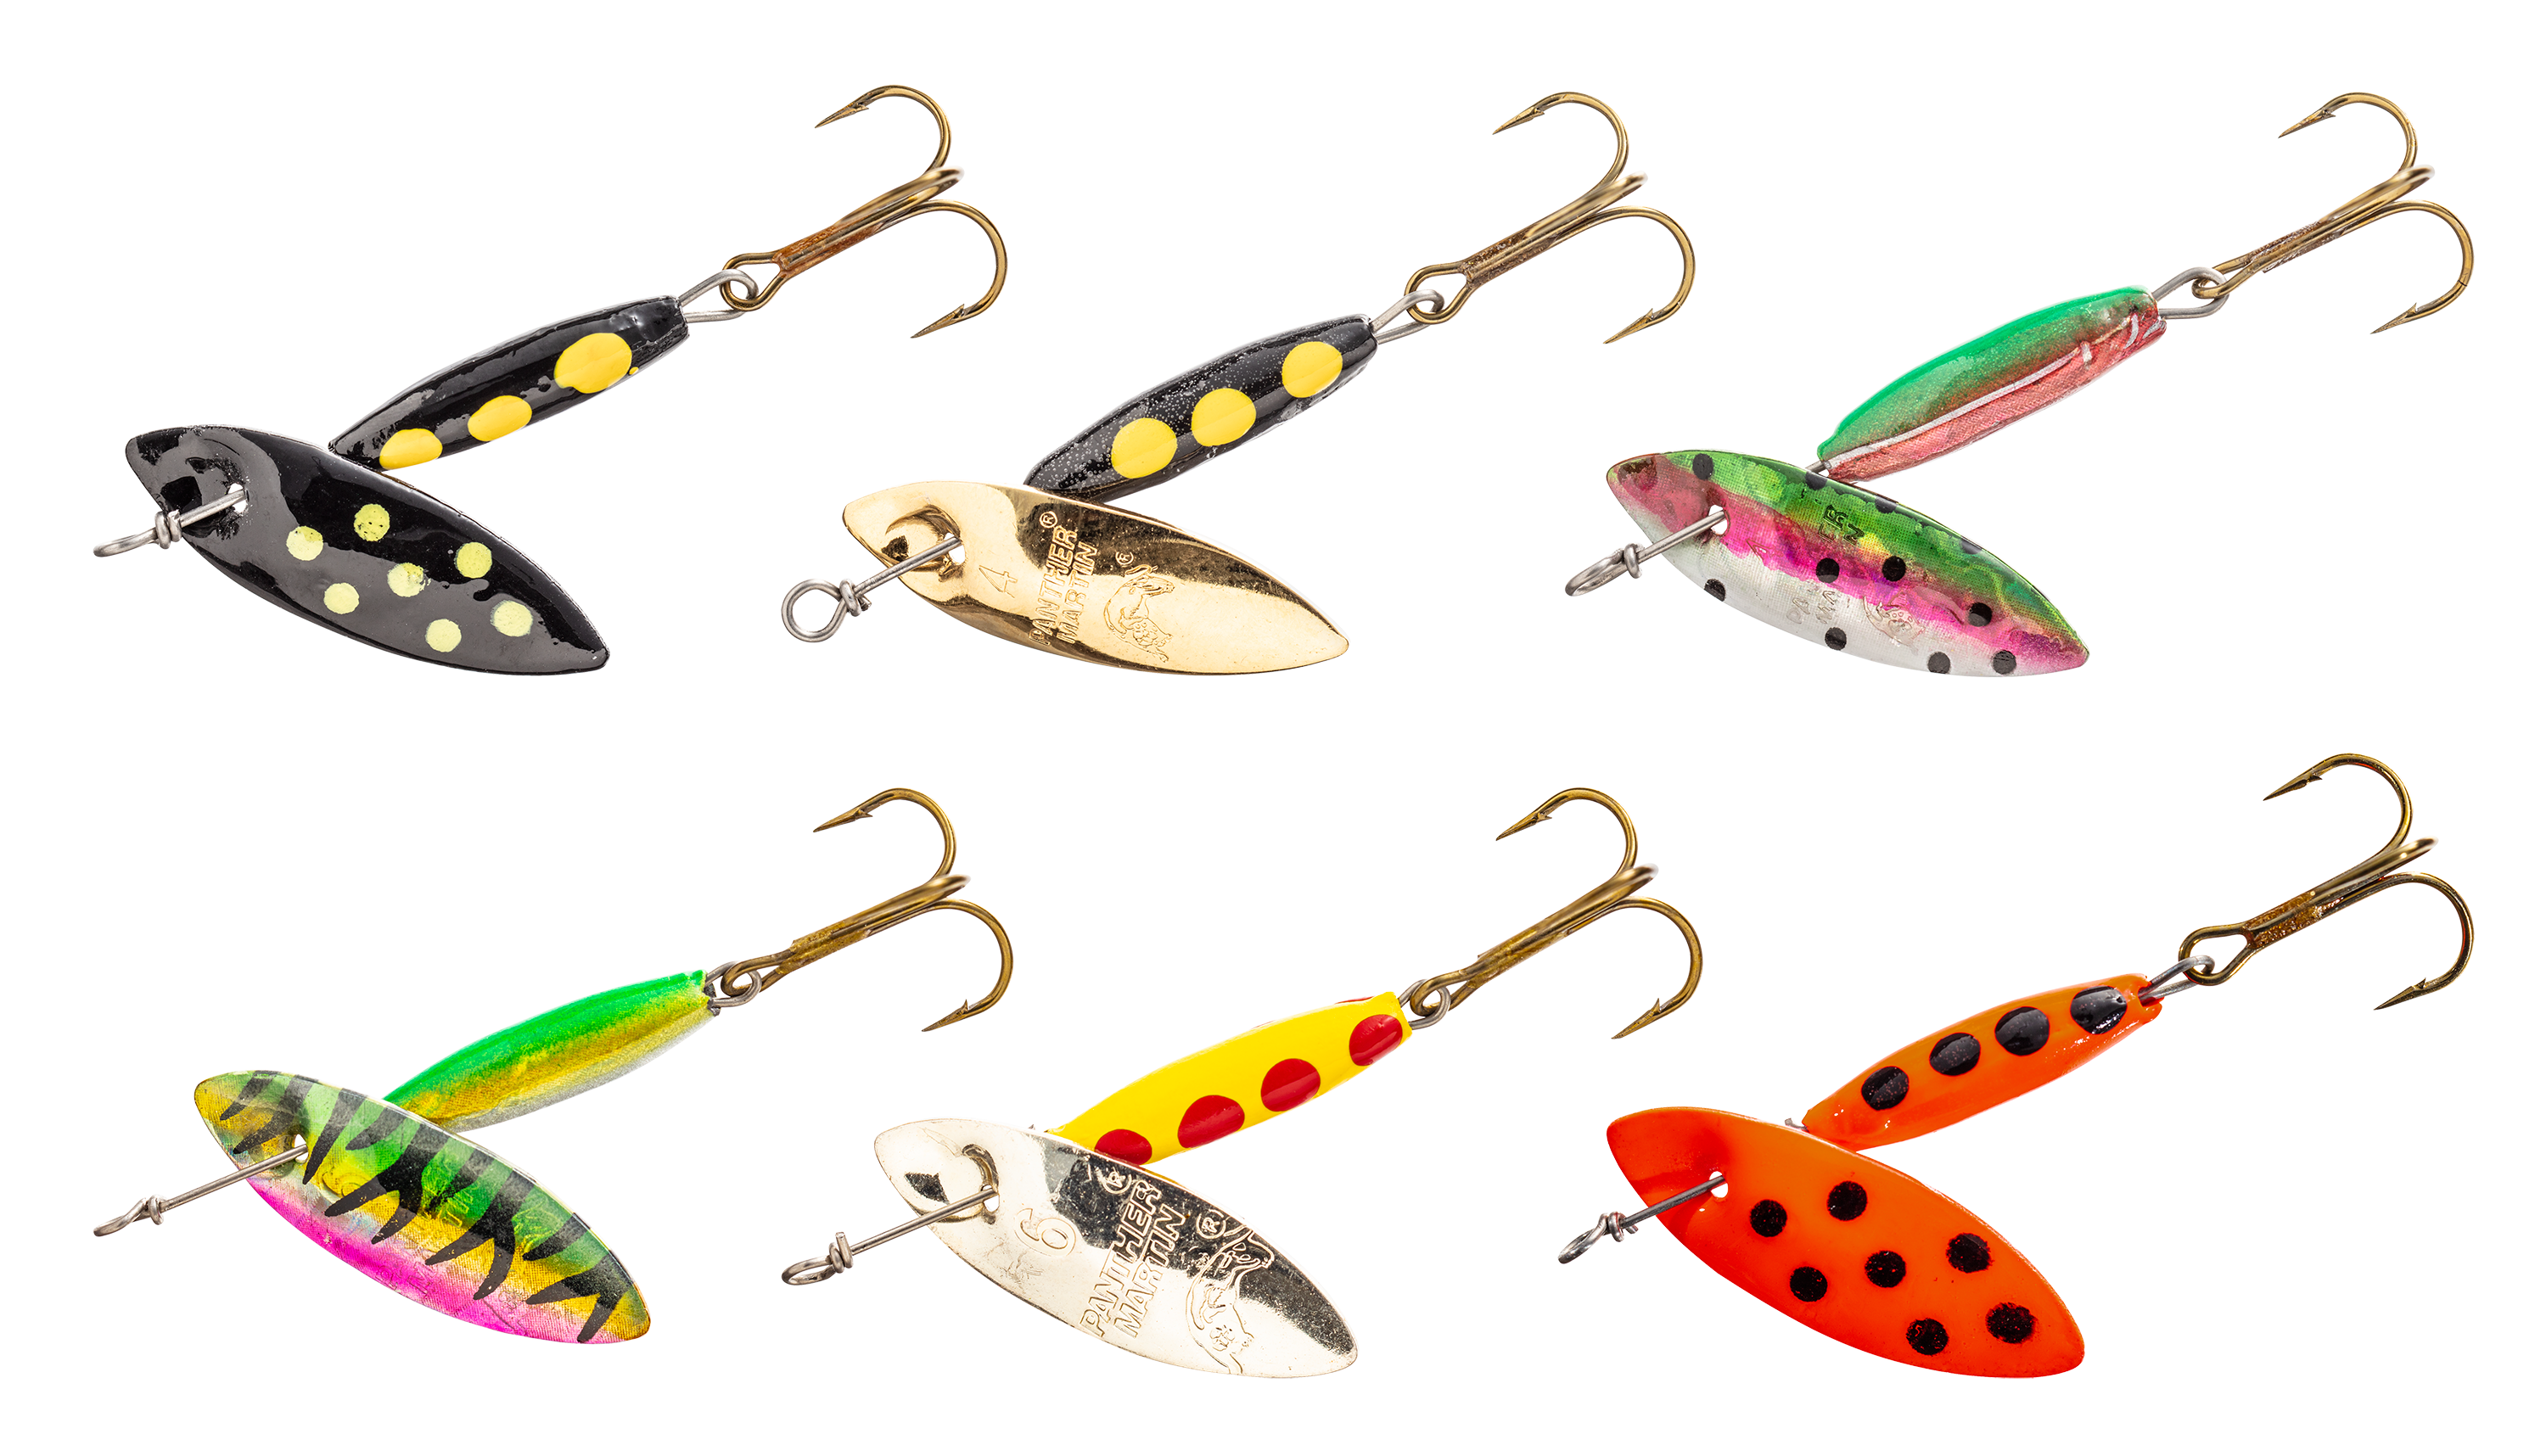 Panther Martin PMWS6 Willow Strike Spinners Fishing Lure Kit - Assorted -  Pack of 6